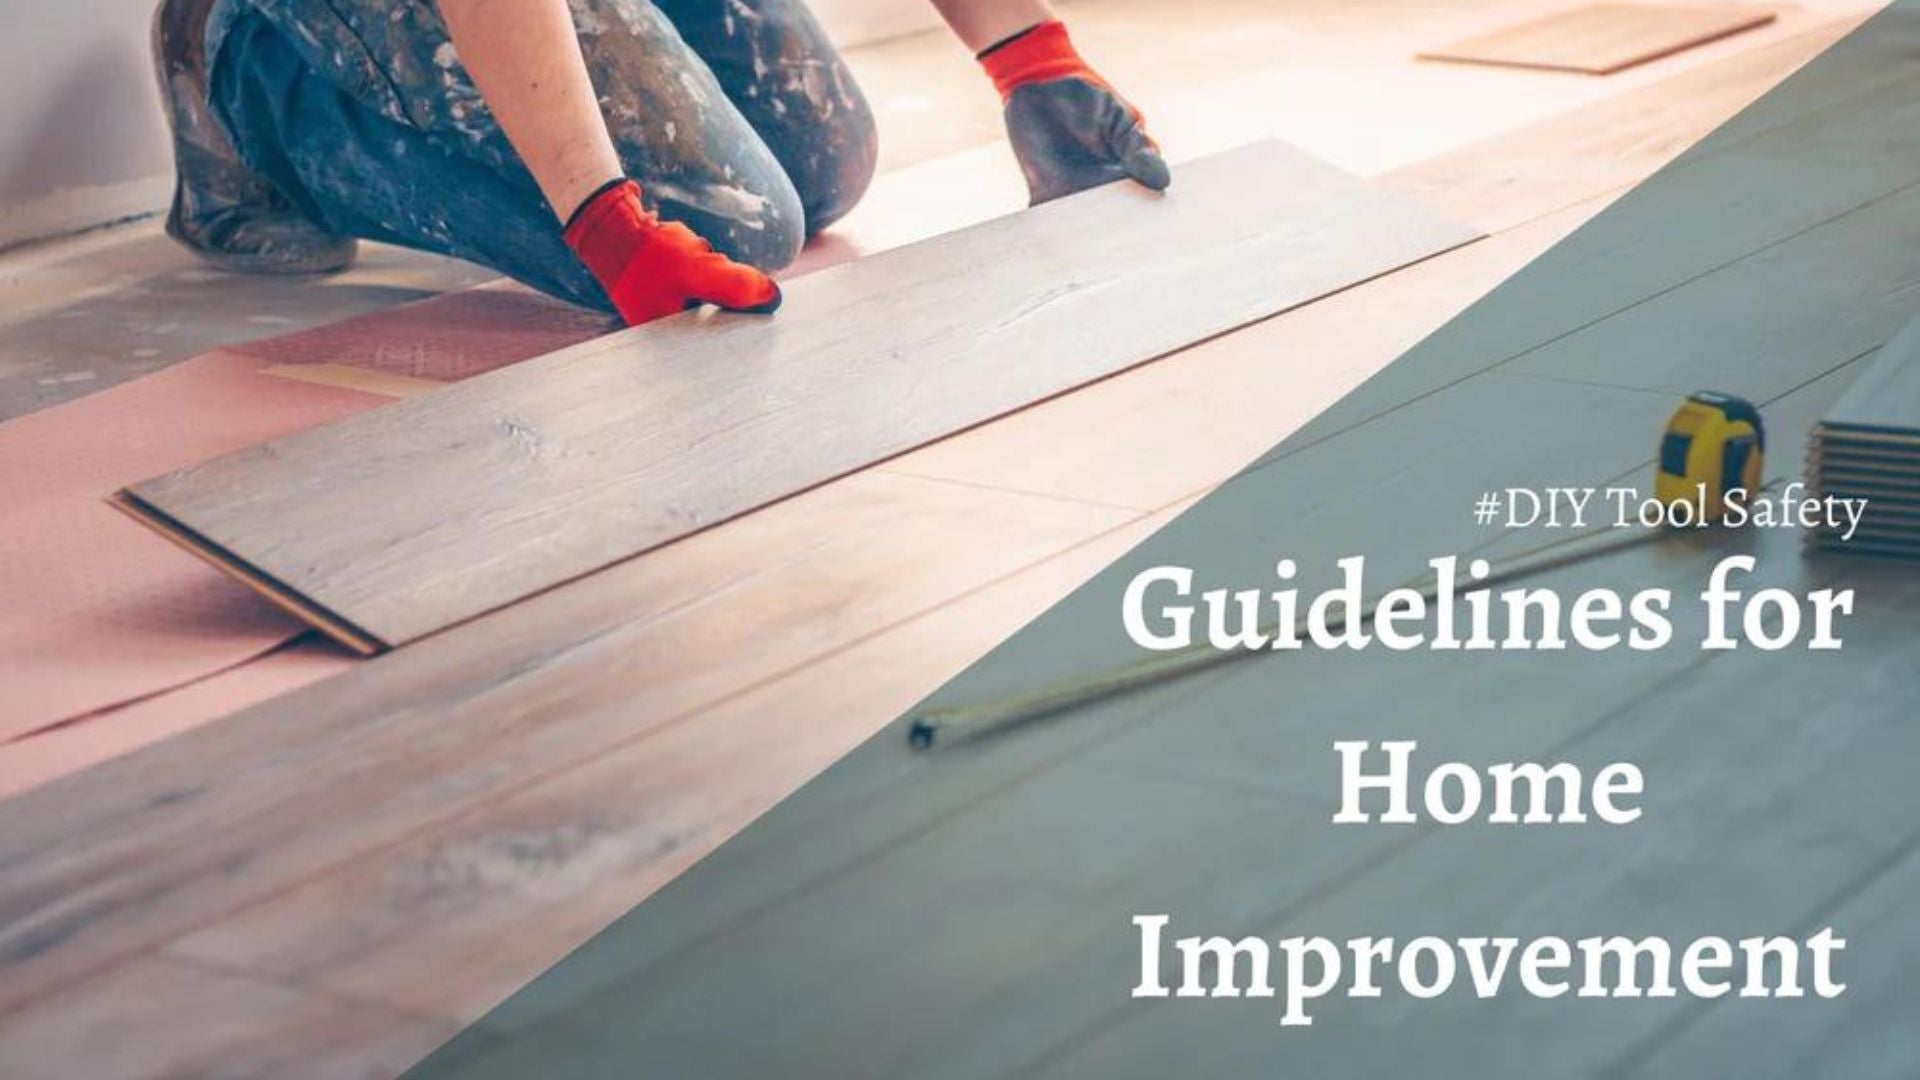 DIY Tool Safety: Tips and Guidelines for Home Improvement